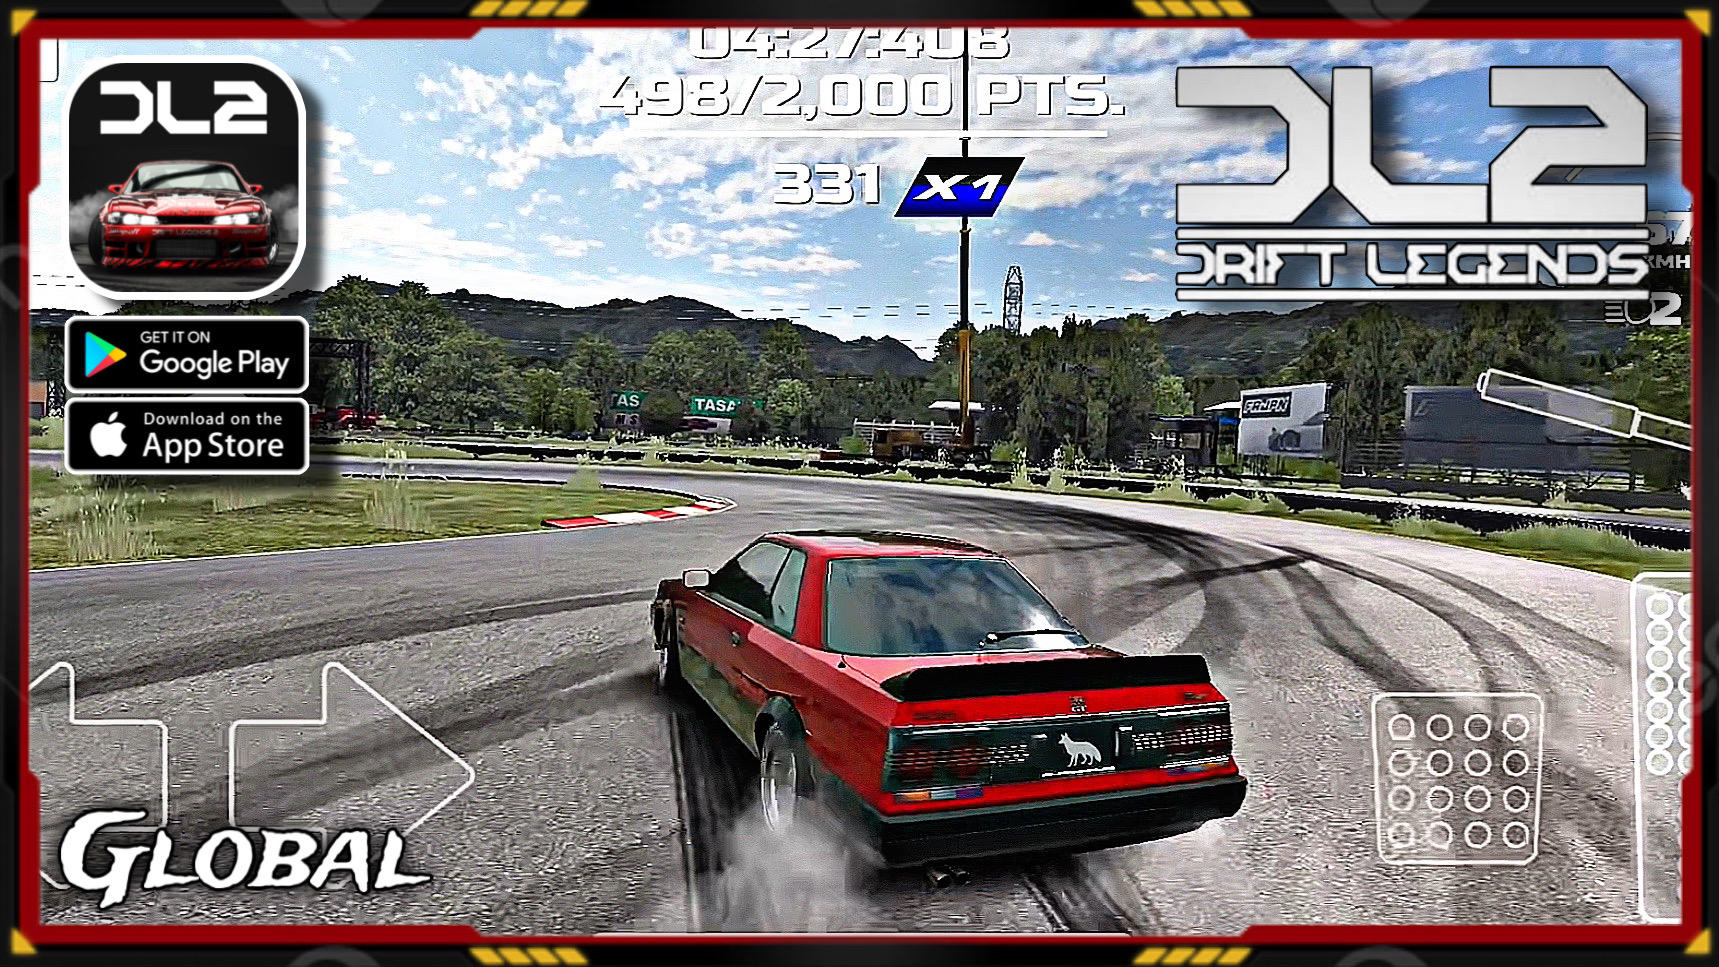 How to download CarX Drift Racing 2 on Android